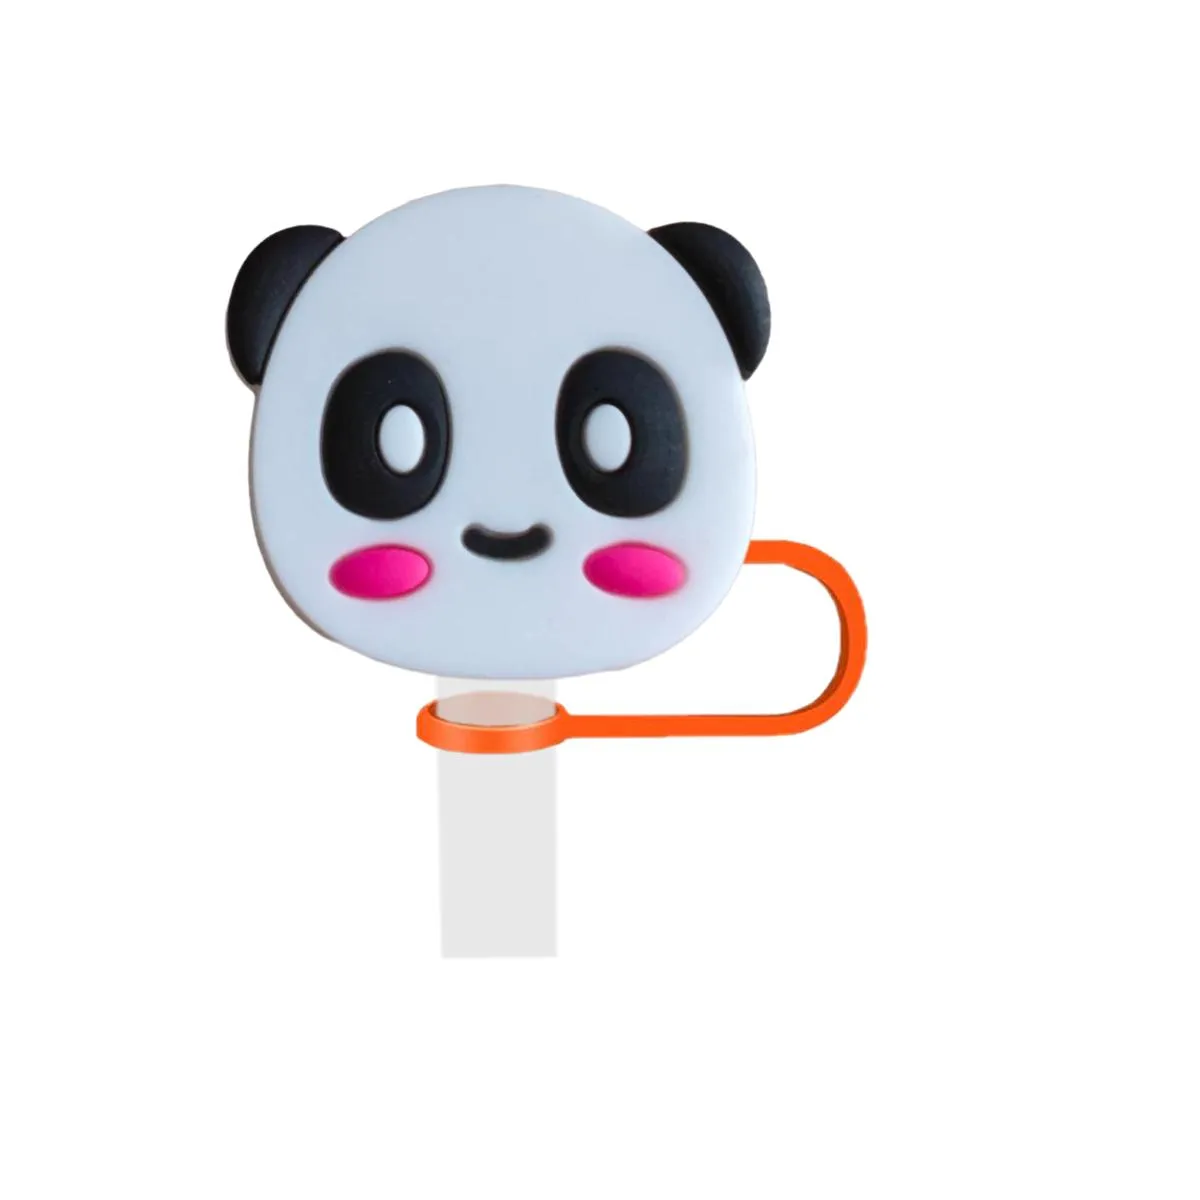 panda 12 straw cover for  cups silicone covers cup accessories cap fit straws suitable traveling picnicking topper pack of 10mm